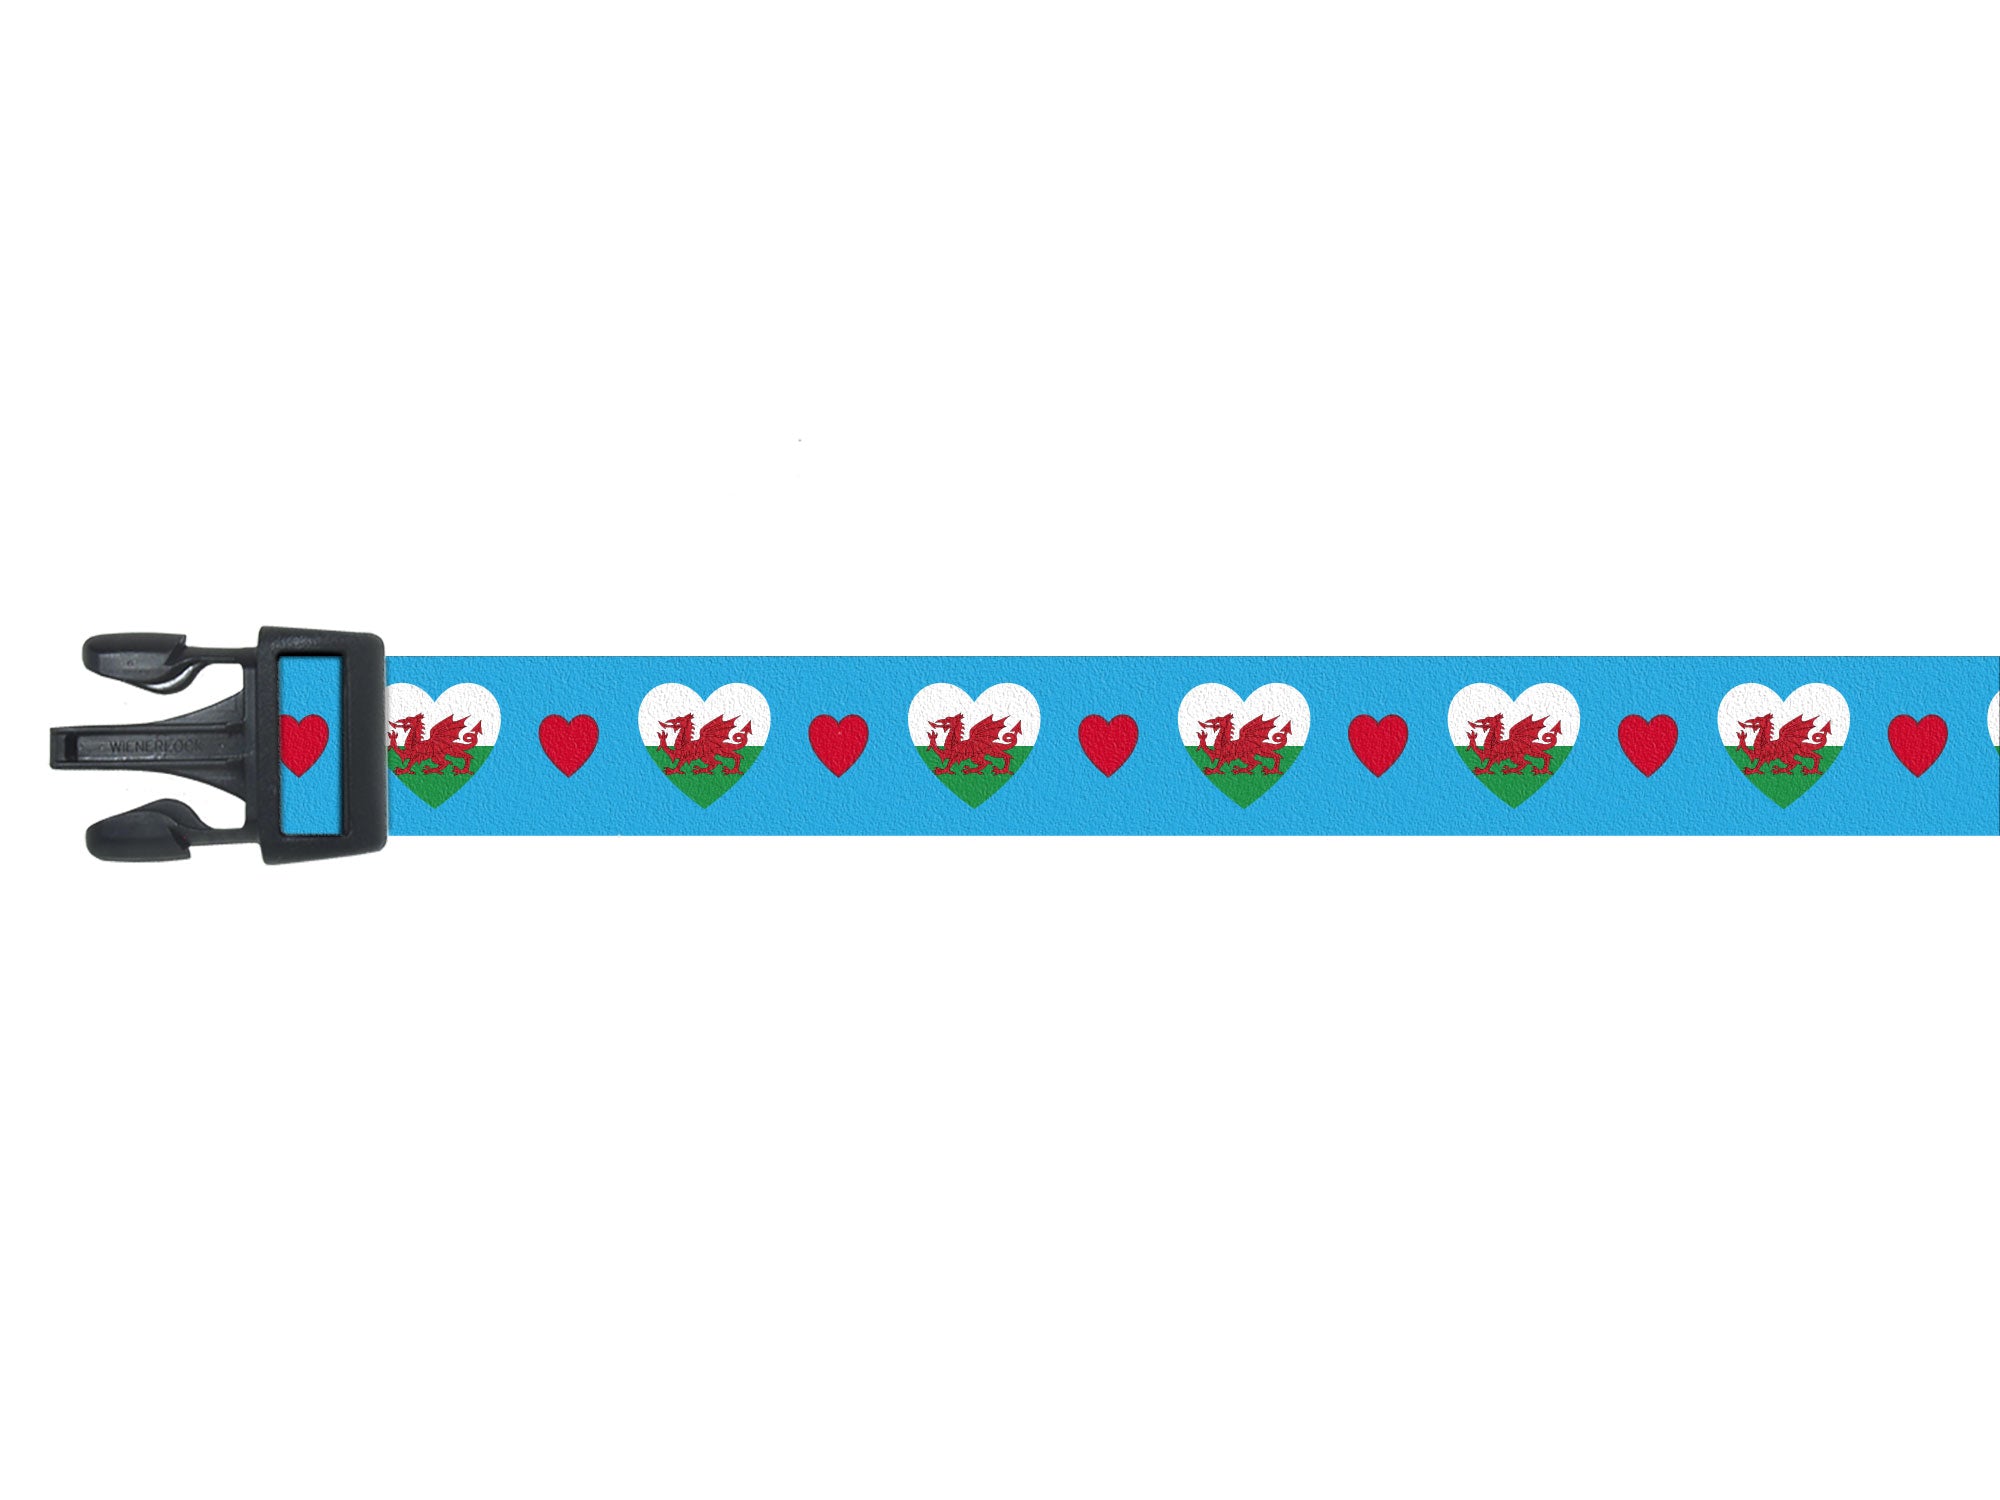 Dog Collar with Wales Hearts Pattern | I Love Wales